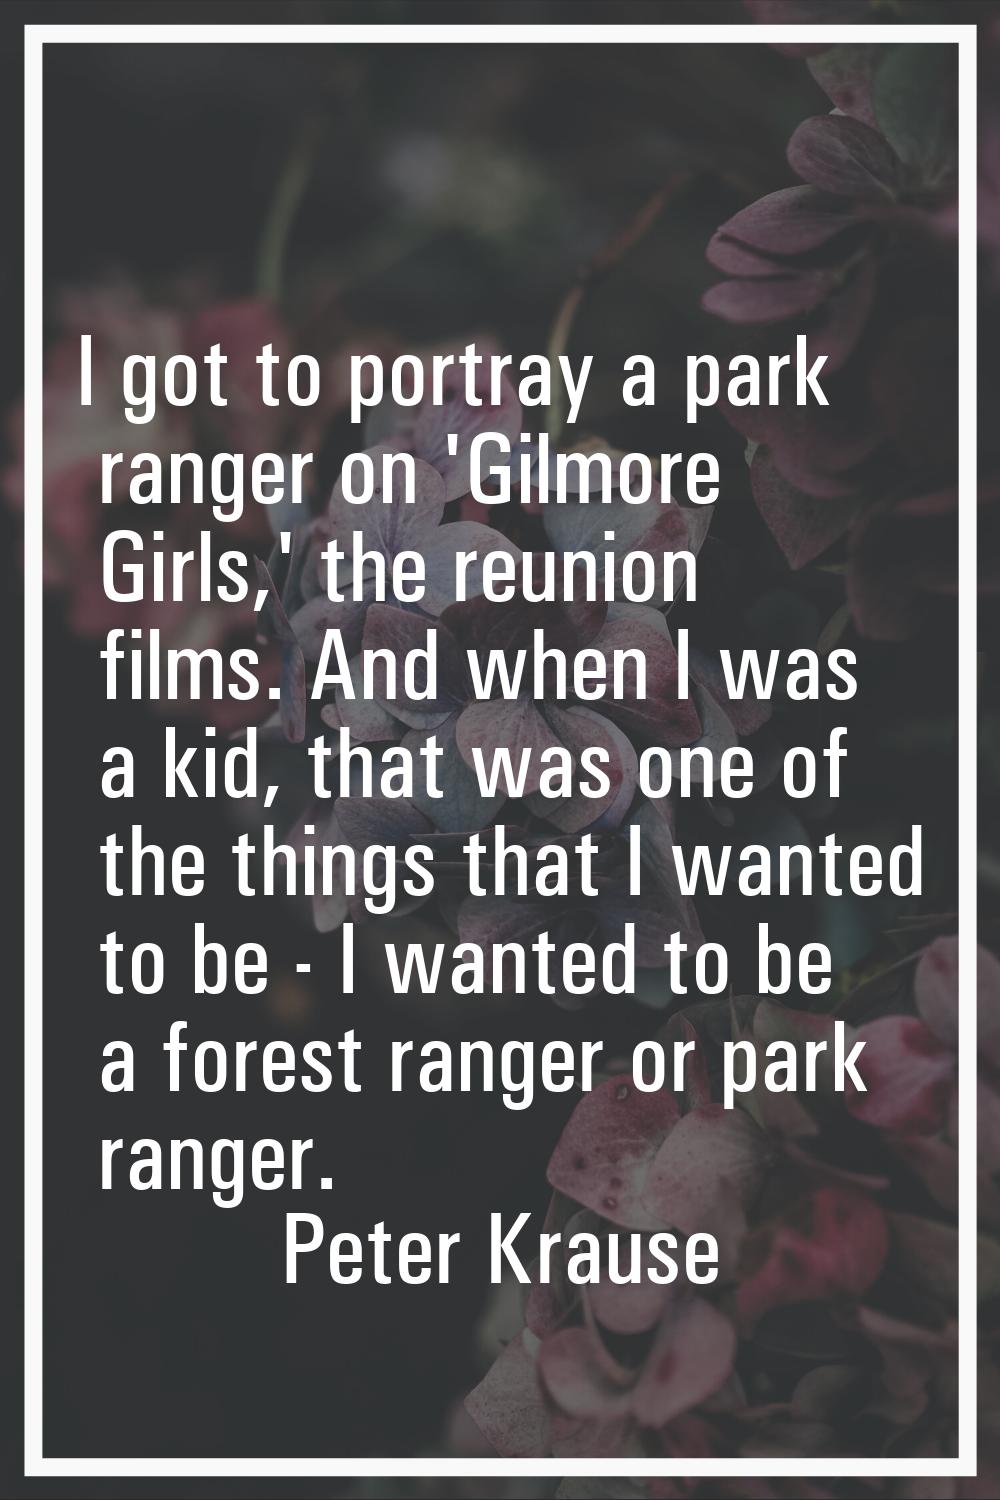 I got to portray a park ranger on 'Gilmore Girls,' the reunion films. And when I was a kid, that wa